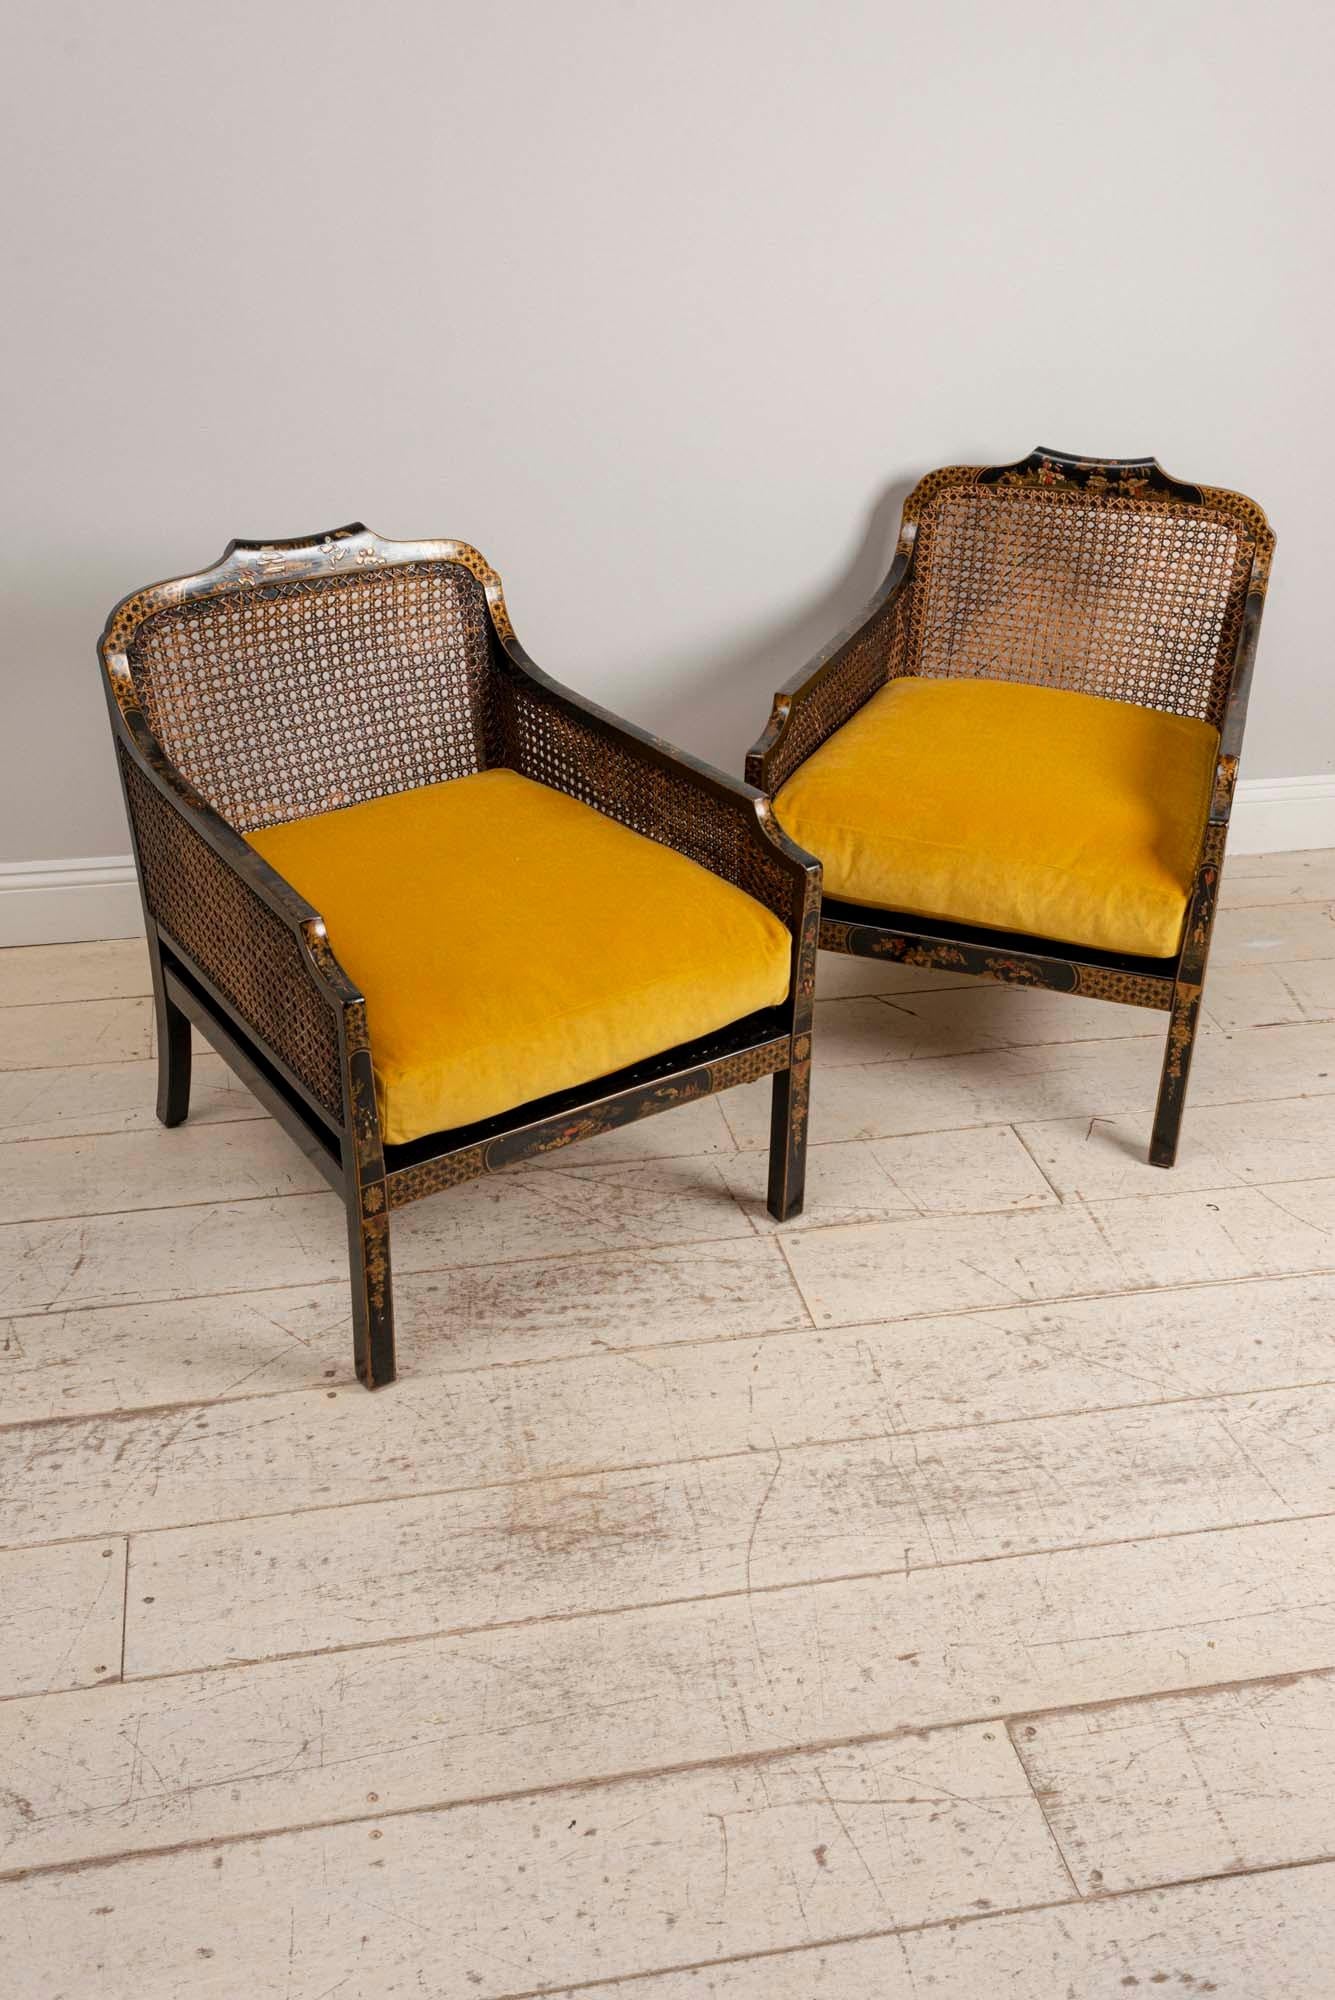 Caning Pair of 1920s English Japanned Armchairs with Chinoiserie Decoration